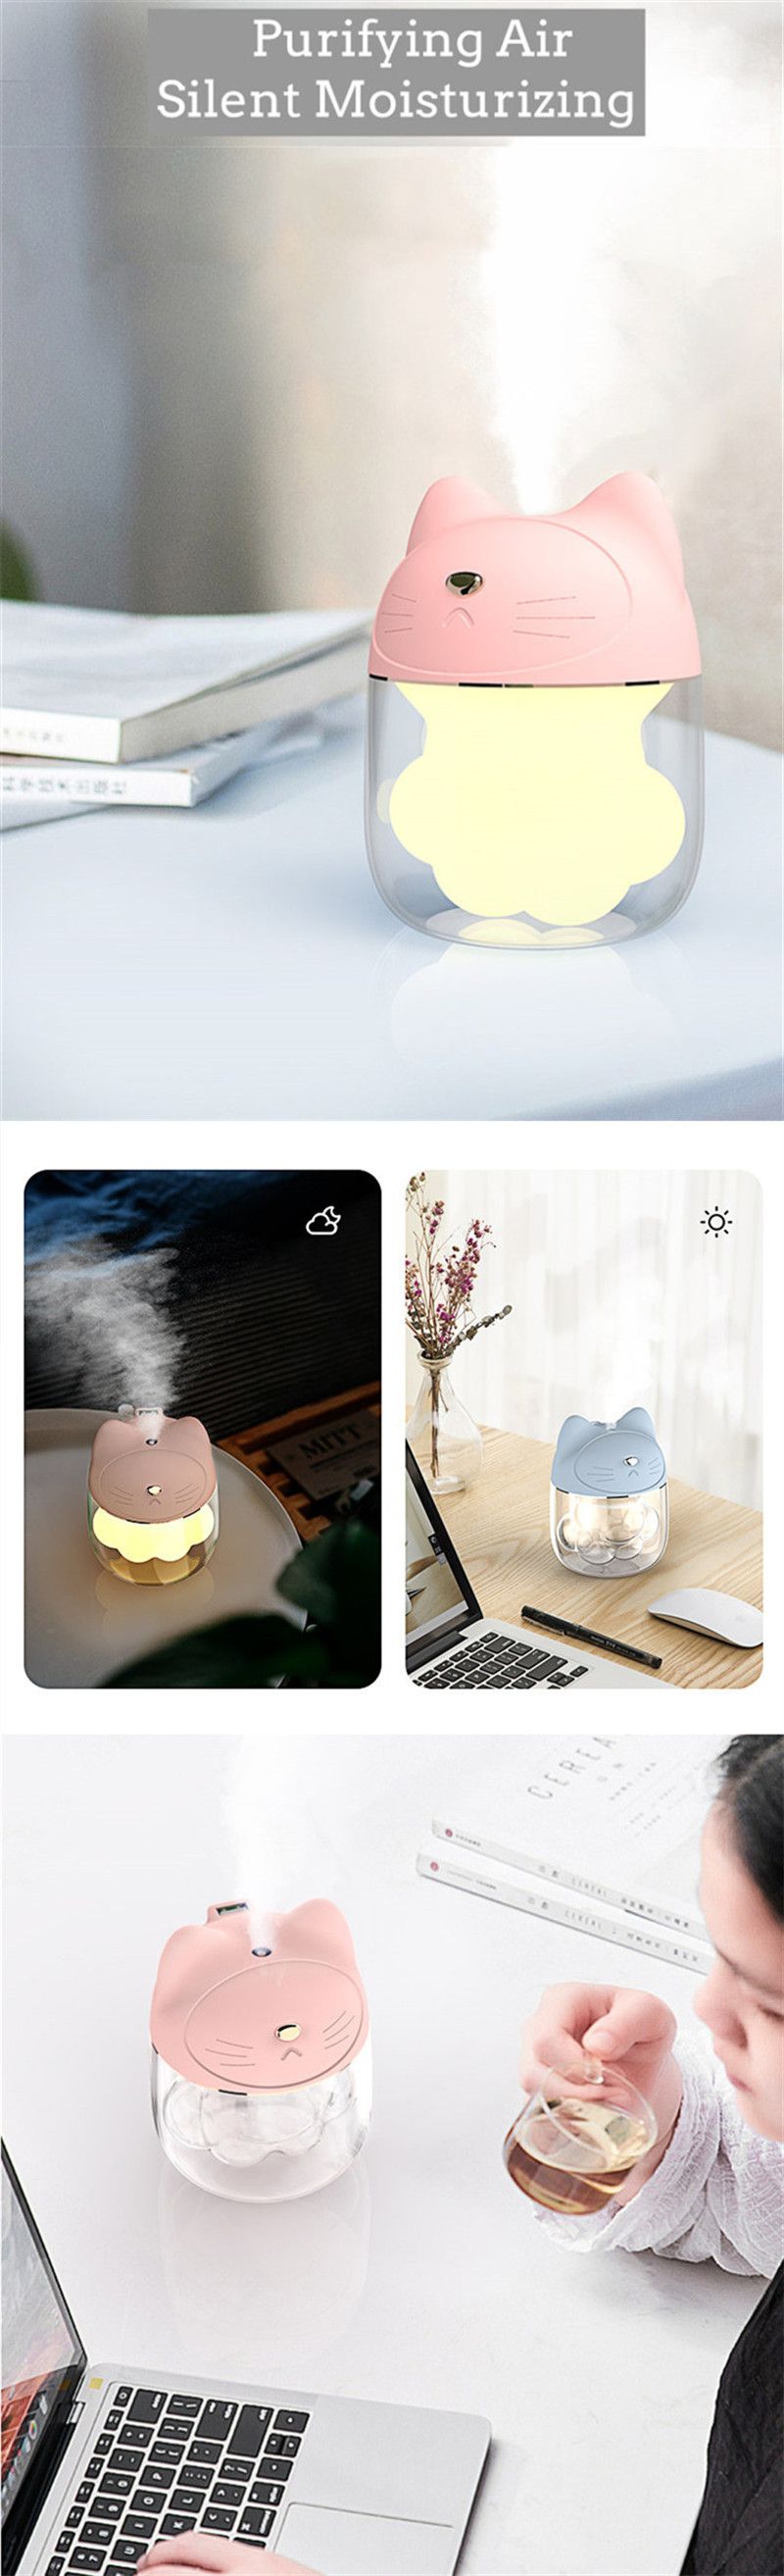 Cat-Claw-Humidifier-Mini-USB-Personal-Small-Humidifier-With-150ml-Water-Tank-7-Color-Night-Light-Coo-1501695